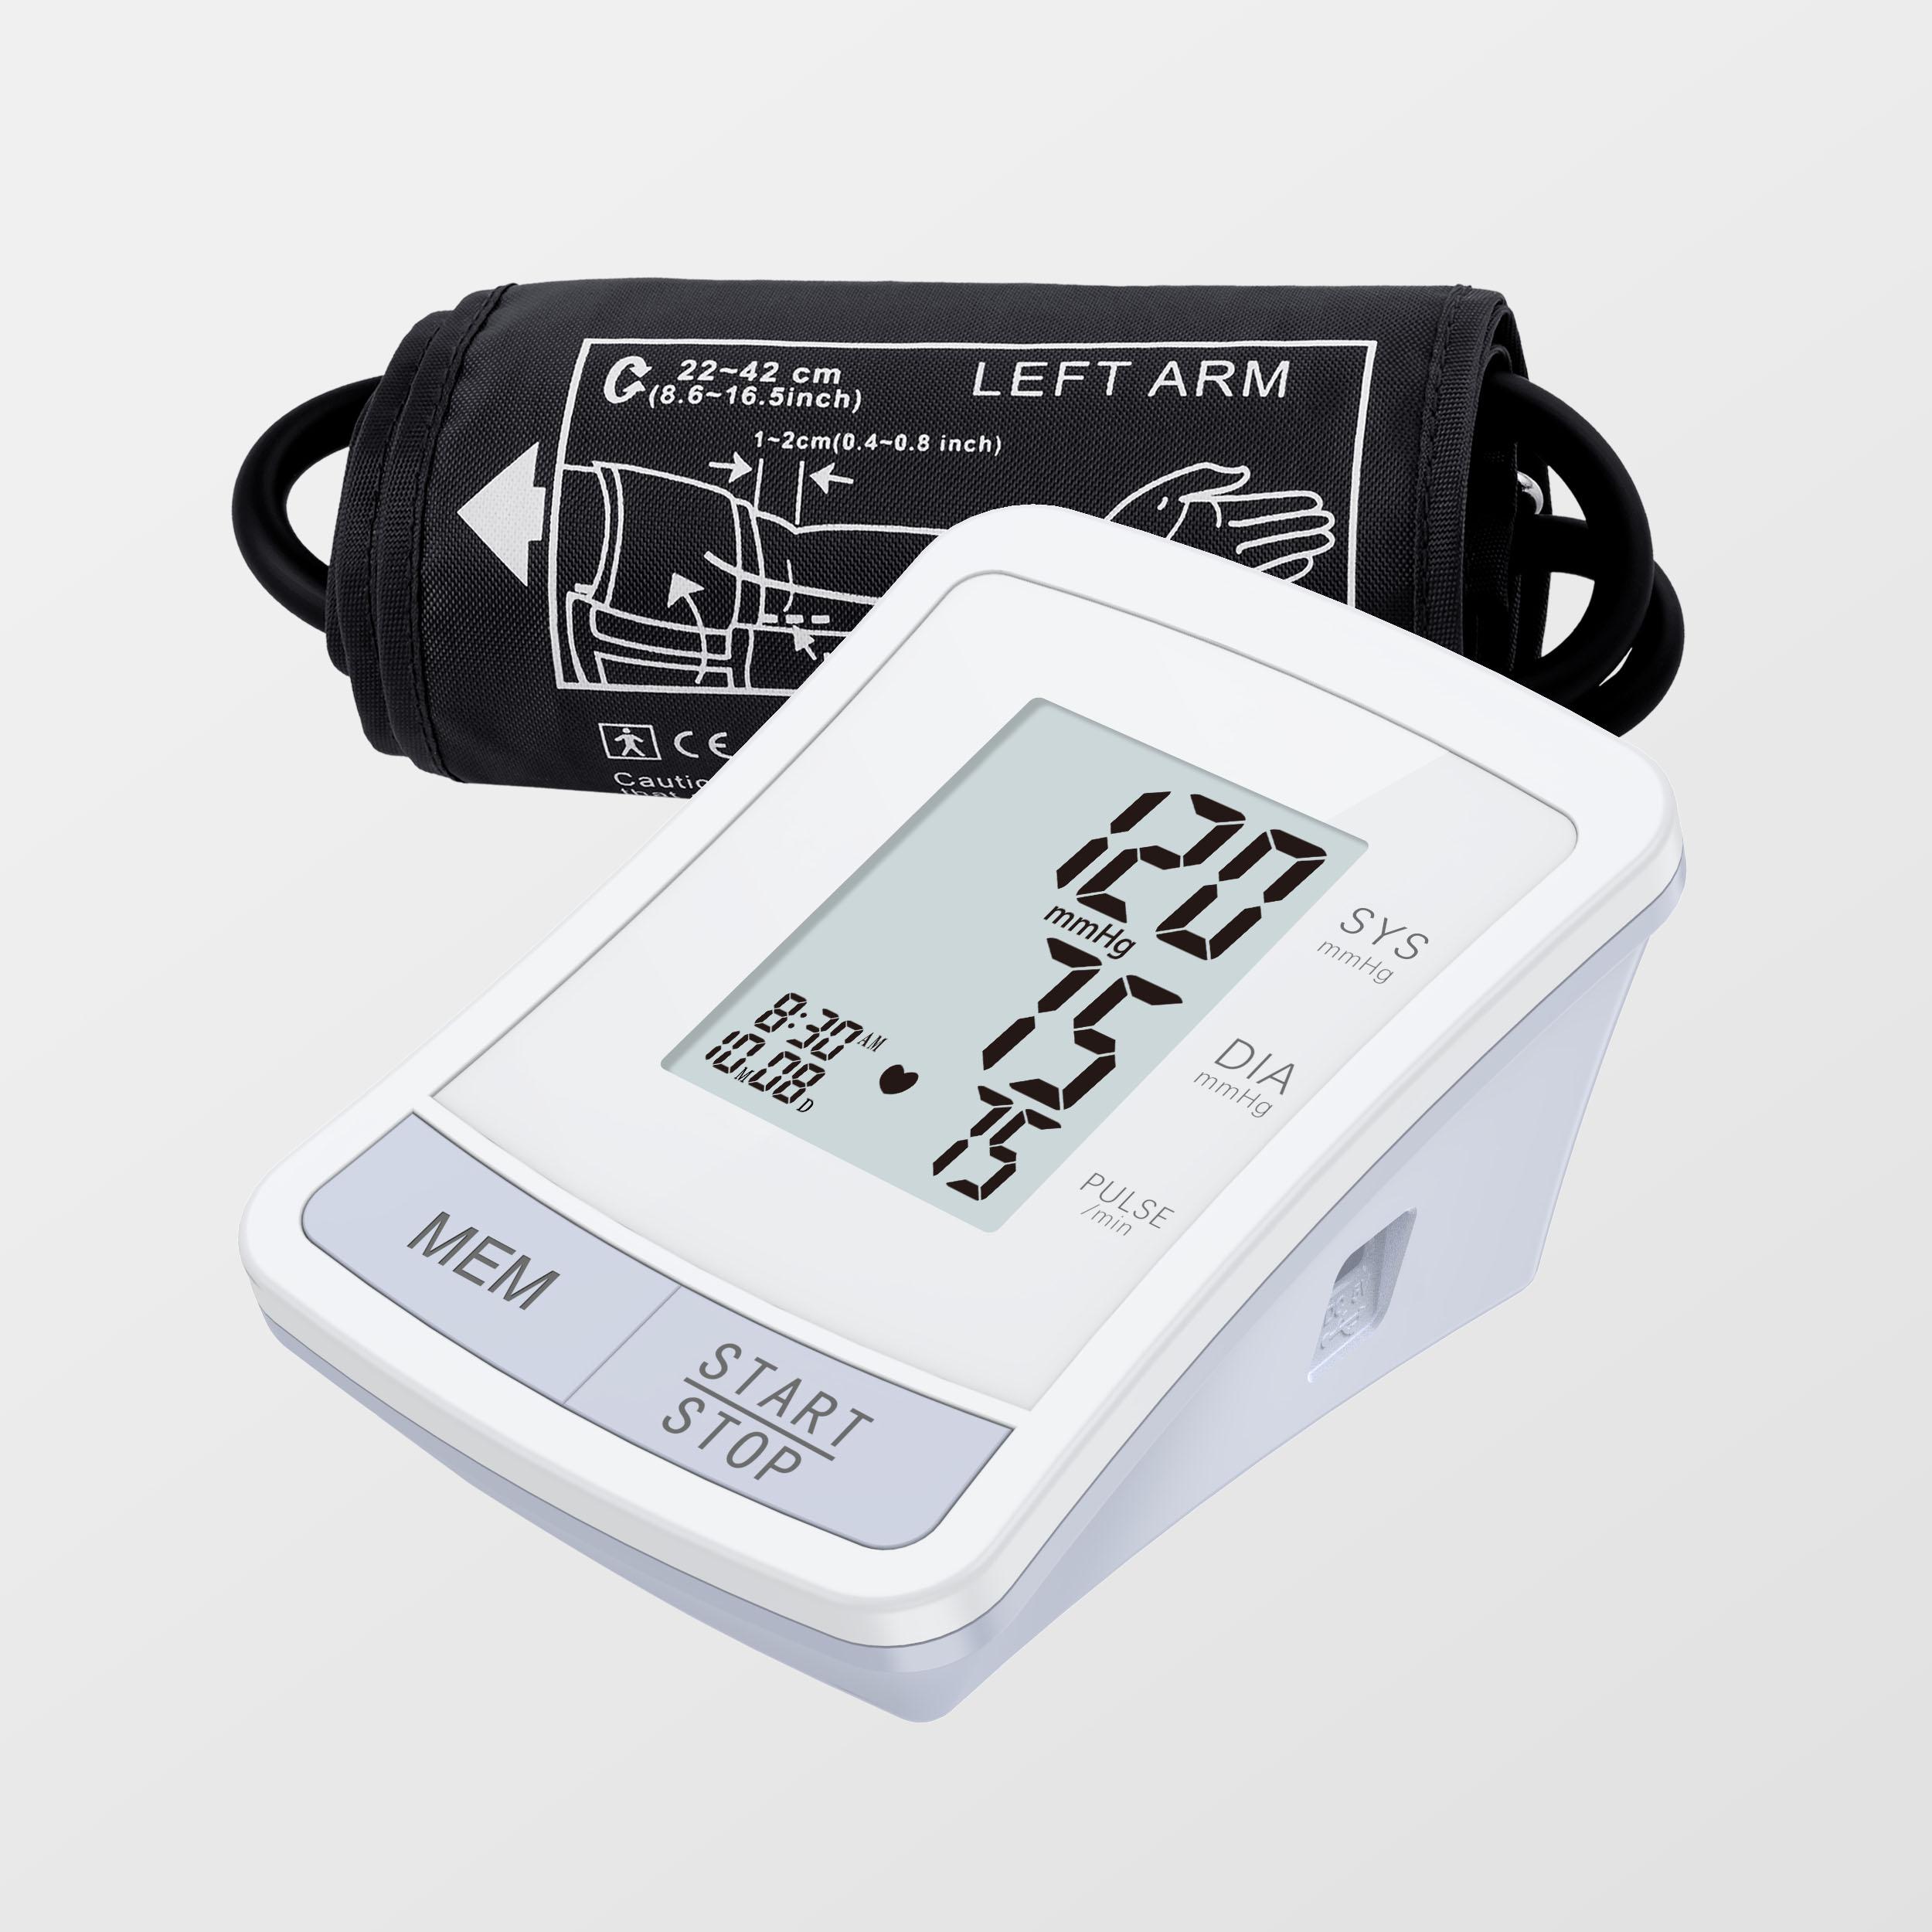 Automatic Electronic Digital Blood Pressure Monitor Upper Arm BP Meter